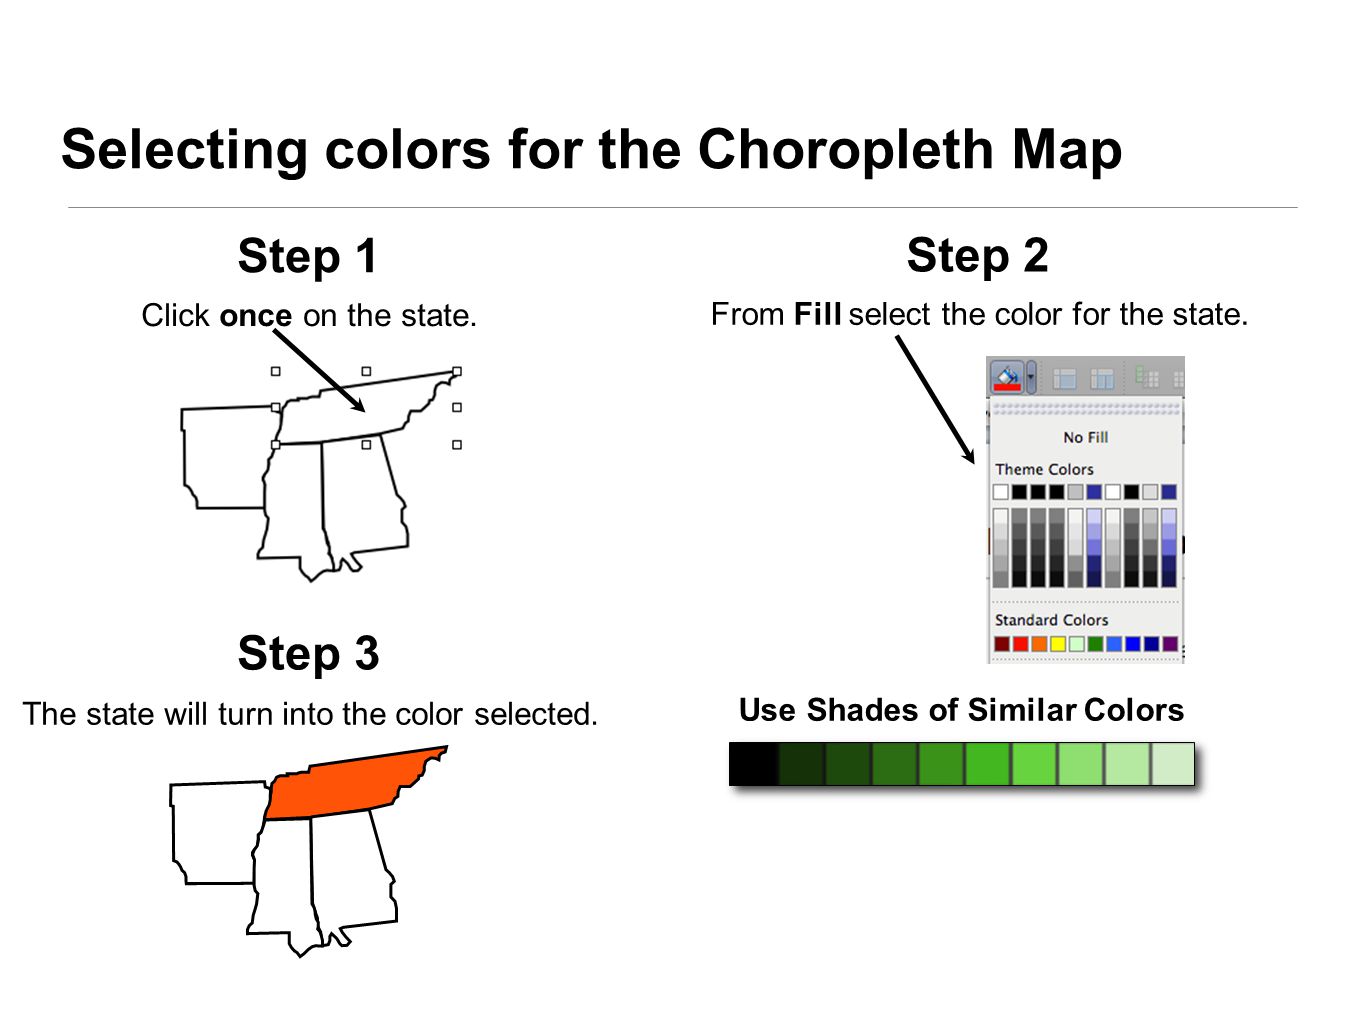 Use Shades of Similar Colors Step 3 The state will turn into the color selected.